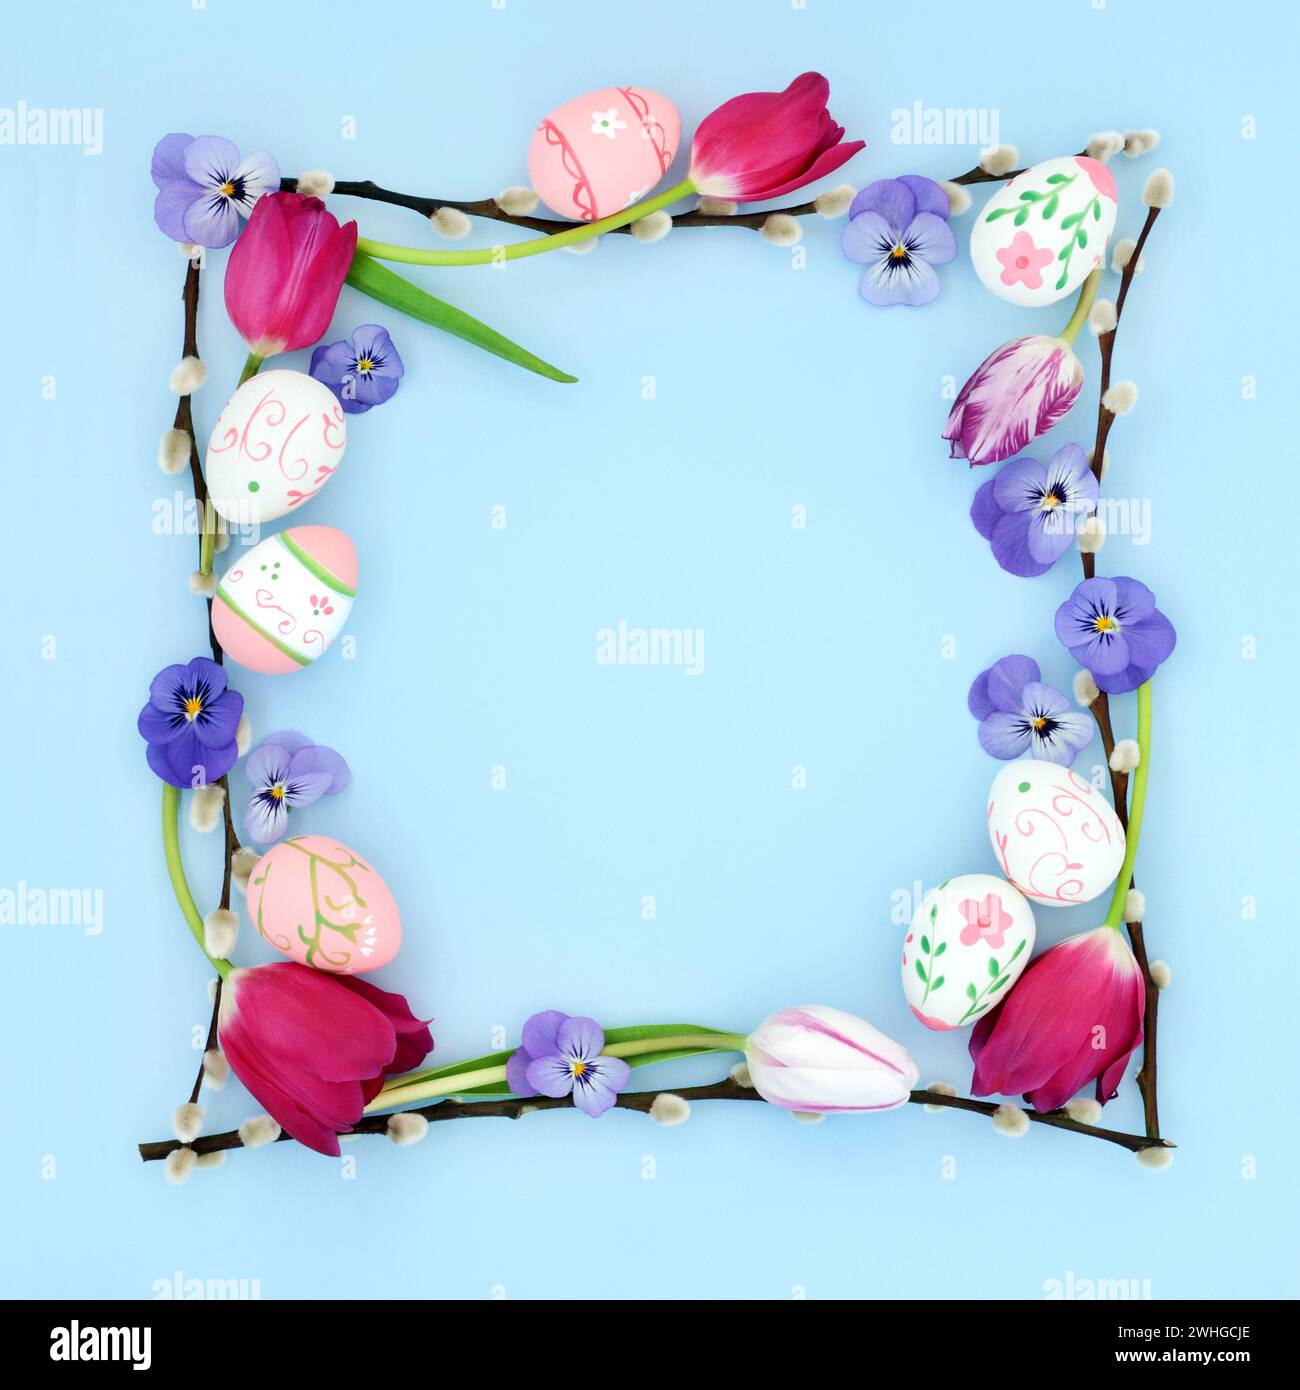 Abstract Easter background border with decorative eggs, flowers and willow branches on pastel blue. Minimal natural fun nature birder frame. Stock Photo